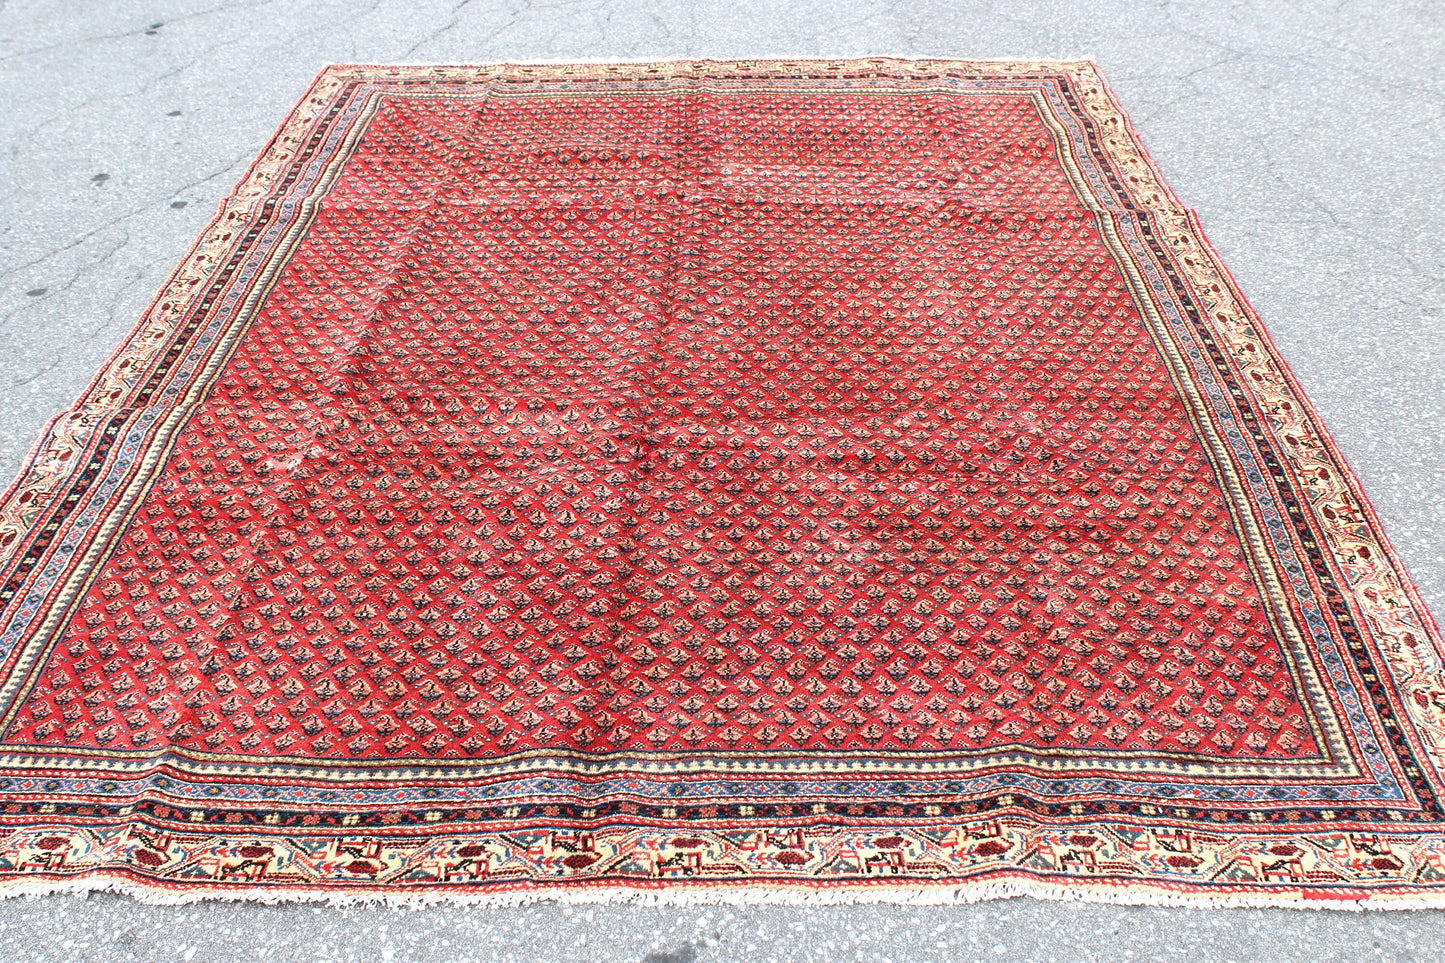 Coral Red 7x10 Rug with Pattern of Small Blue Florals